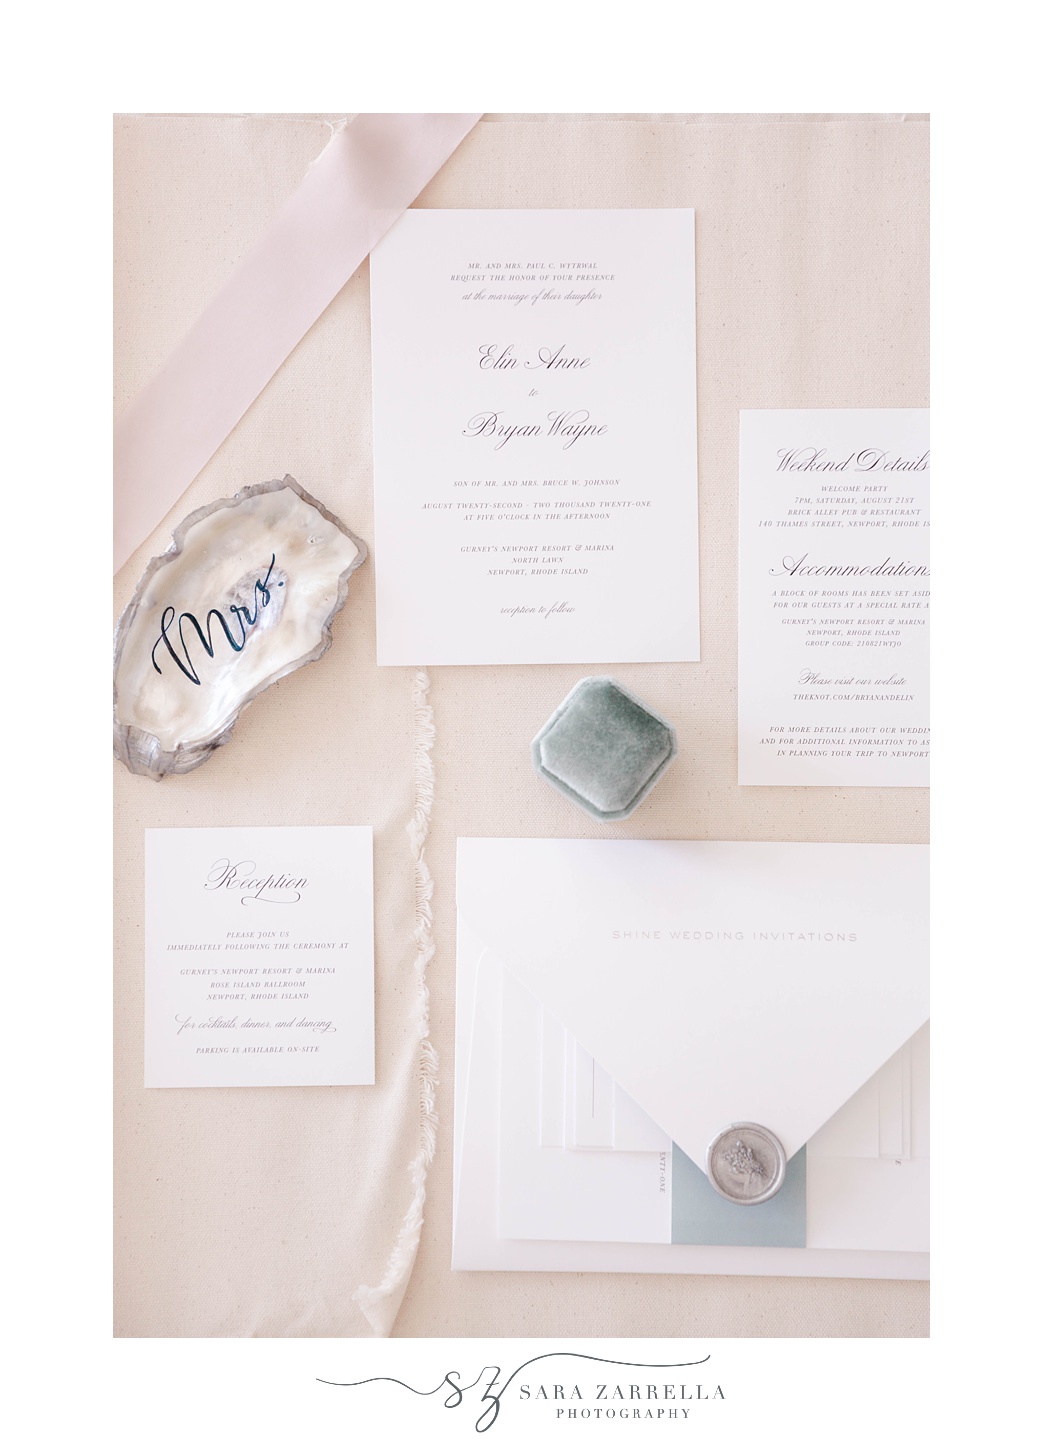 pink and white invitation suite for Gurney's Resort wedding